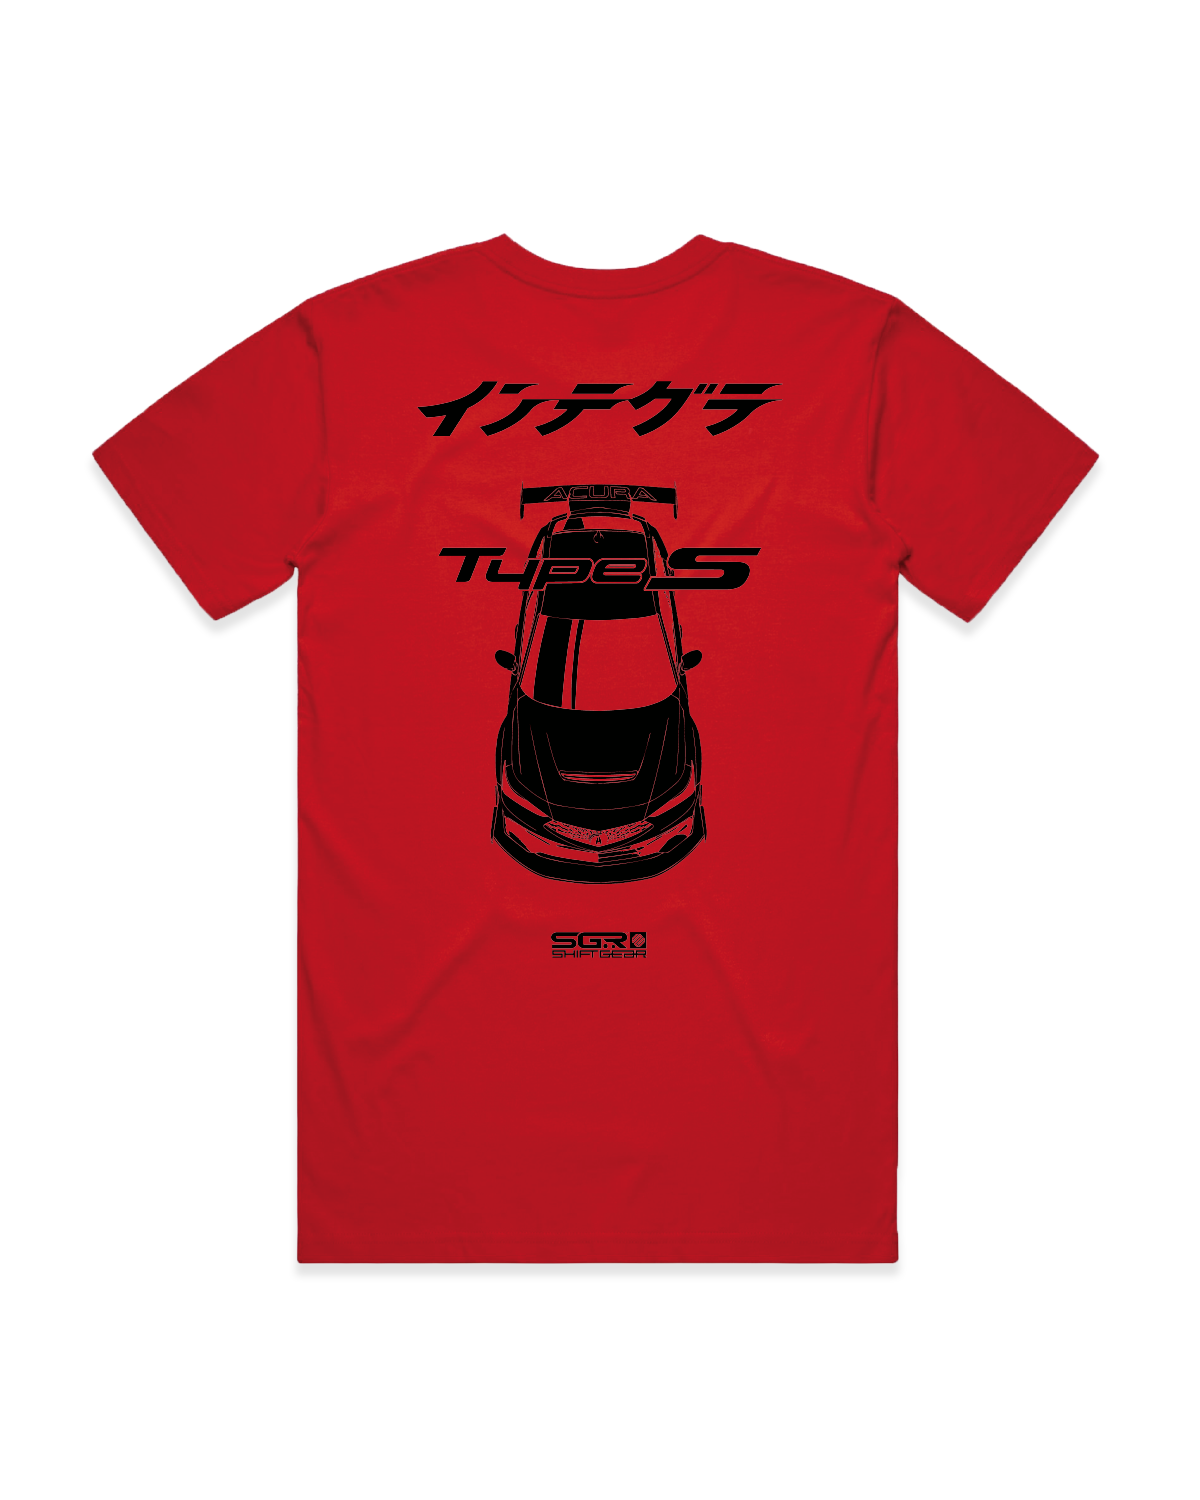 SGR Flying Acura Integra Type S Lineart - Red